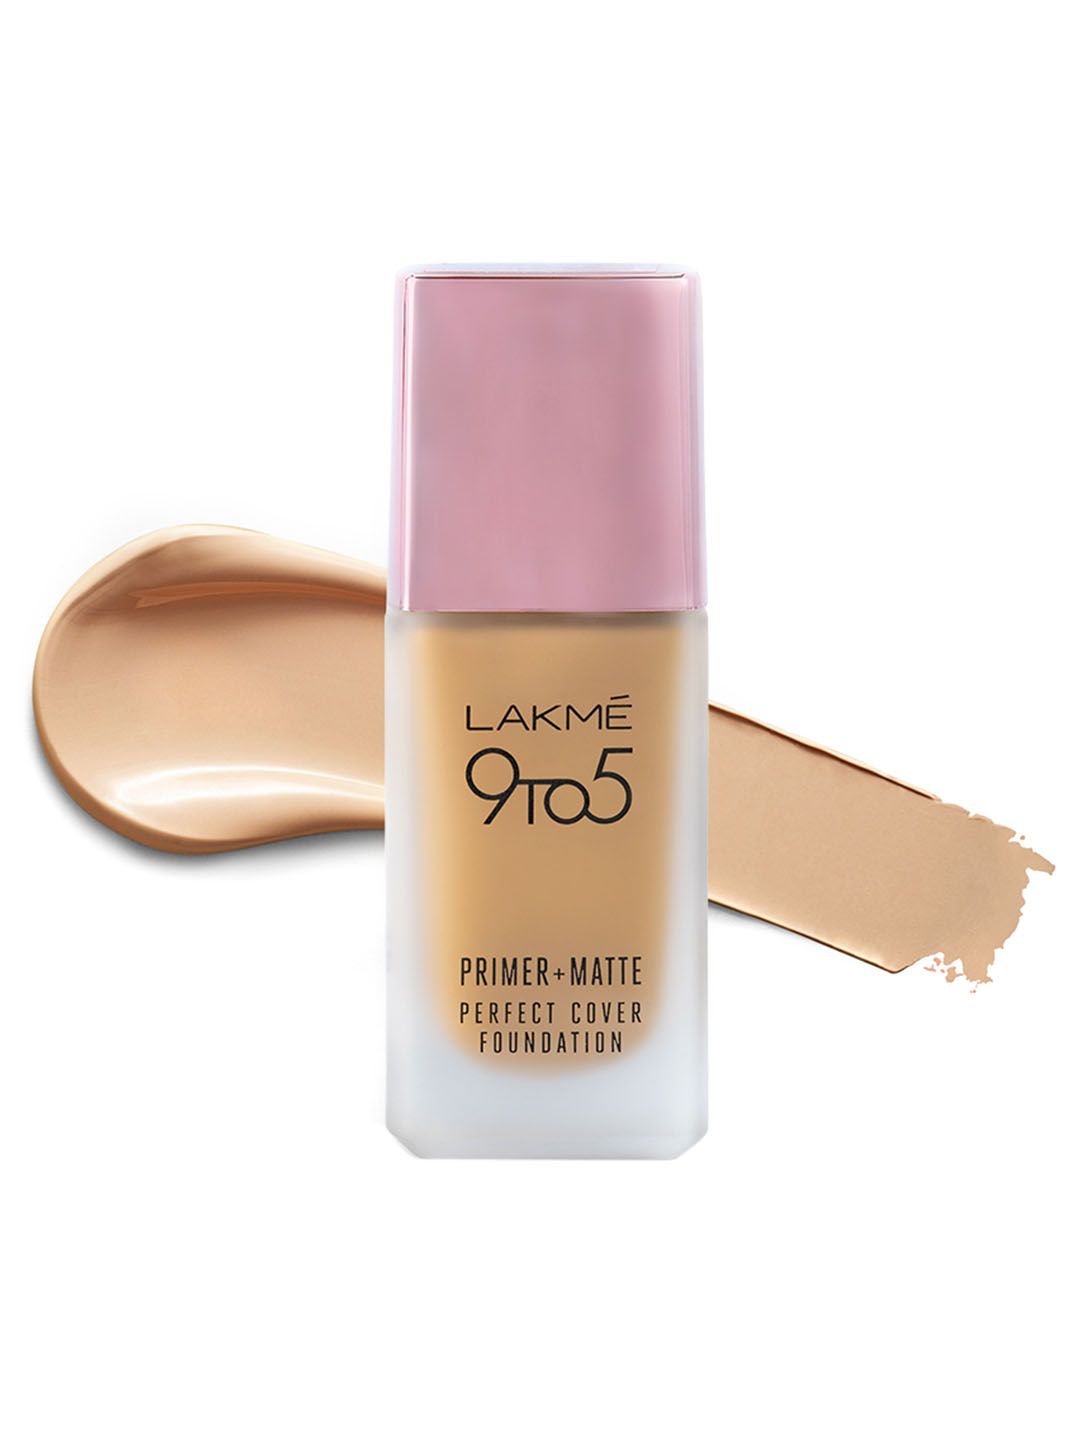 Lakme 9 To5 Primer And Matte Perfect Cover Foundation - Warm Creme W120 25 ml Price in India